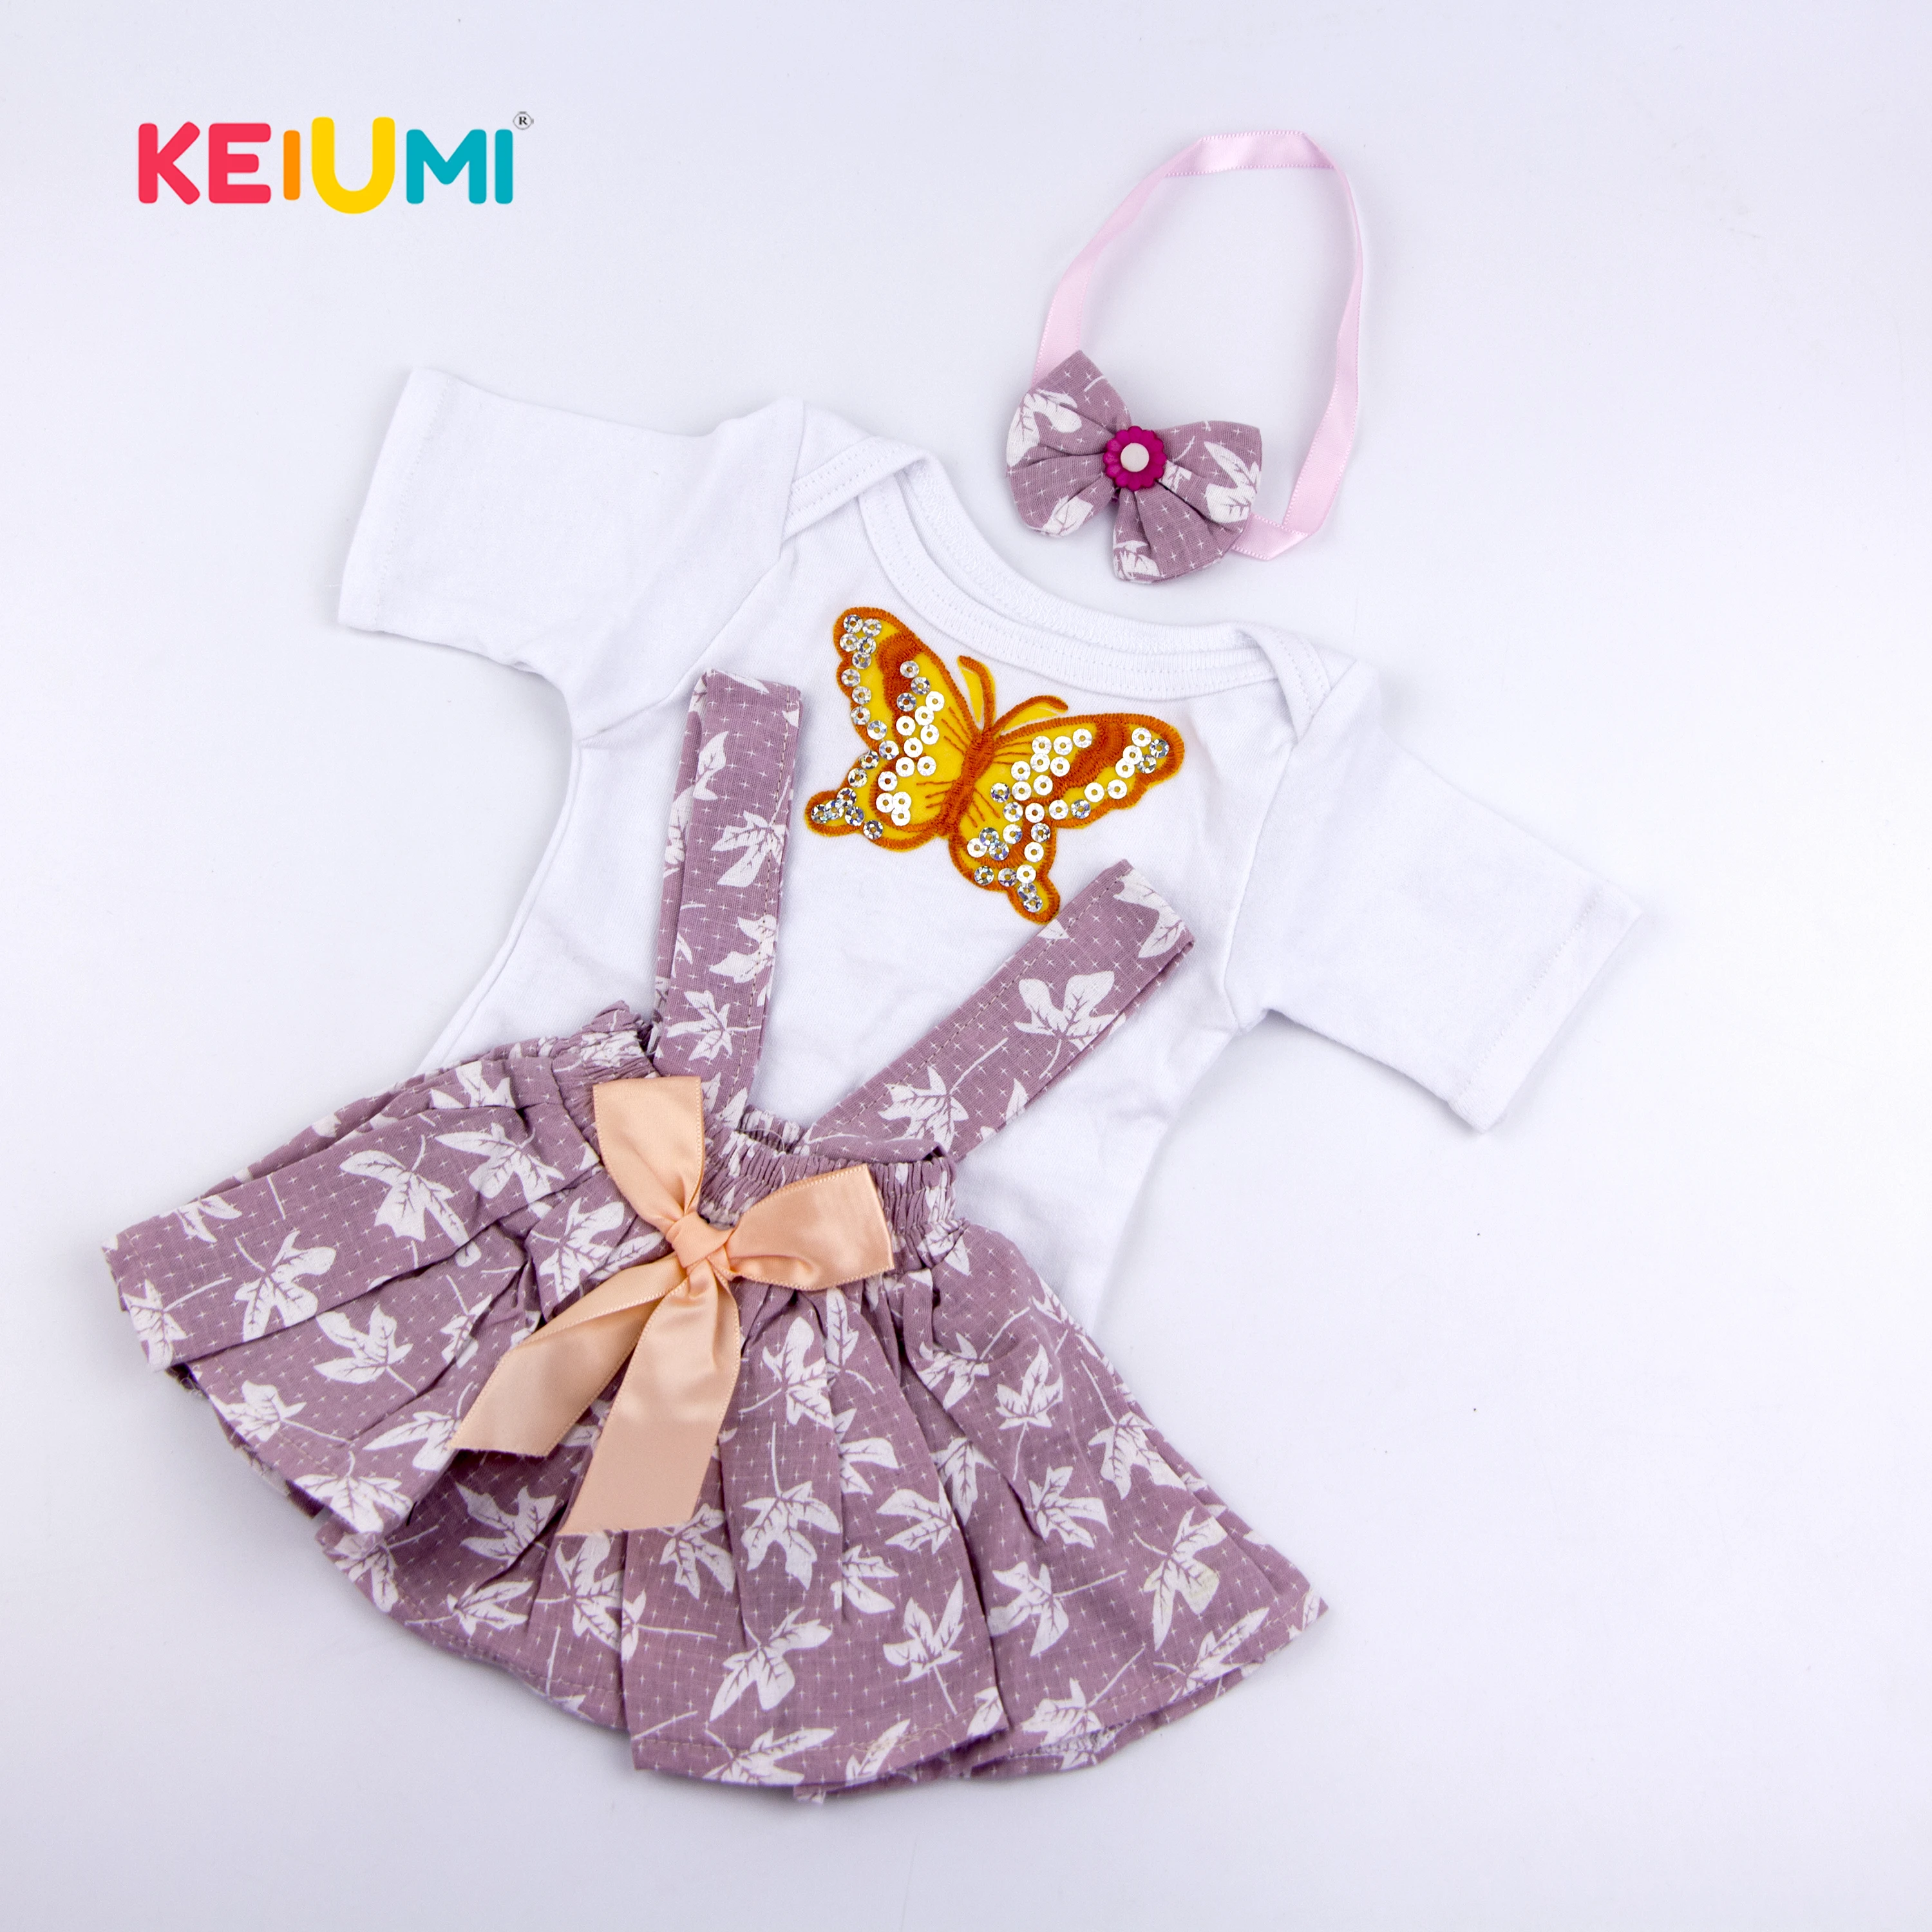 Sweet Reborn Doll Clothing Suit 1 Set For 17-18/" Newborn Doll Girl Boy Clothes@@